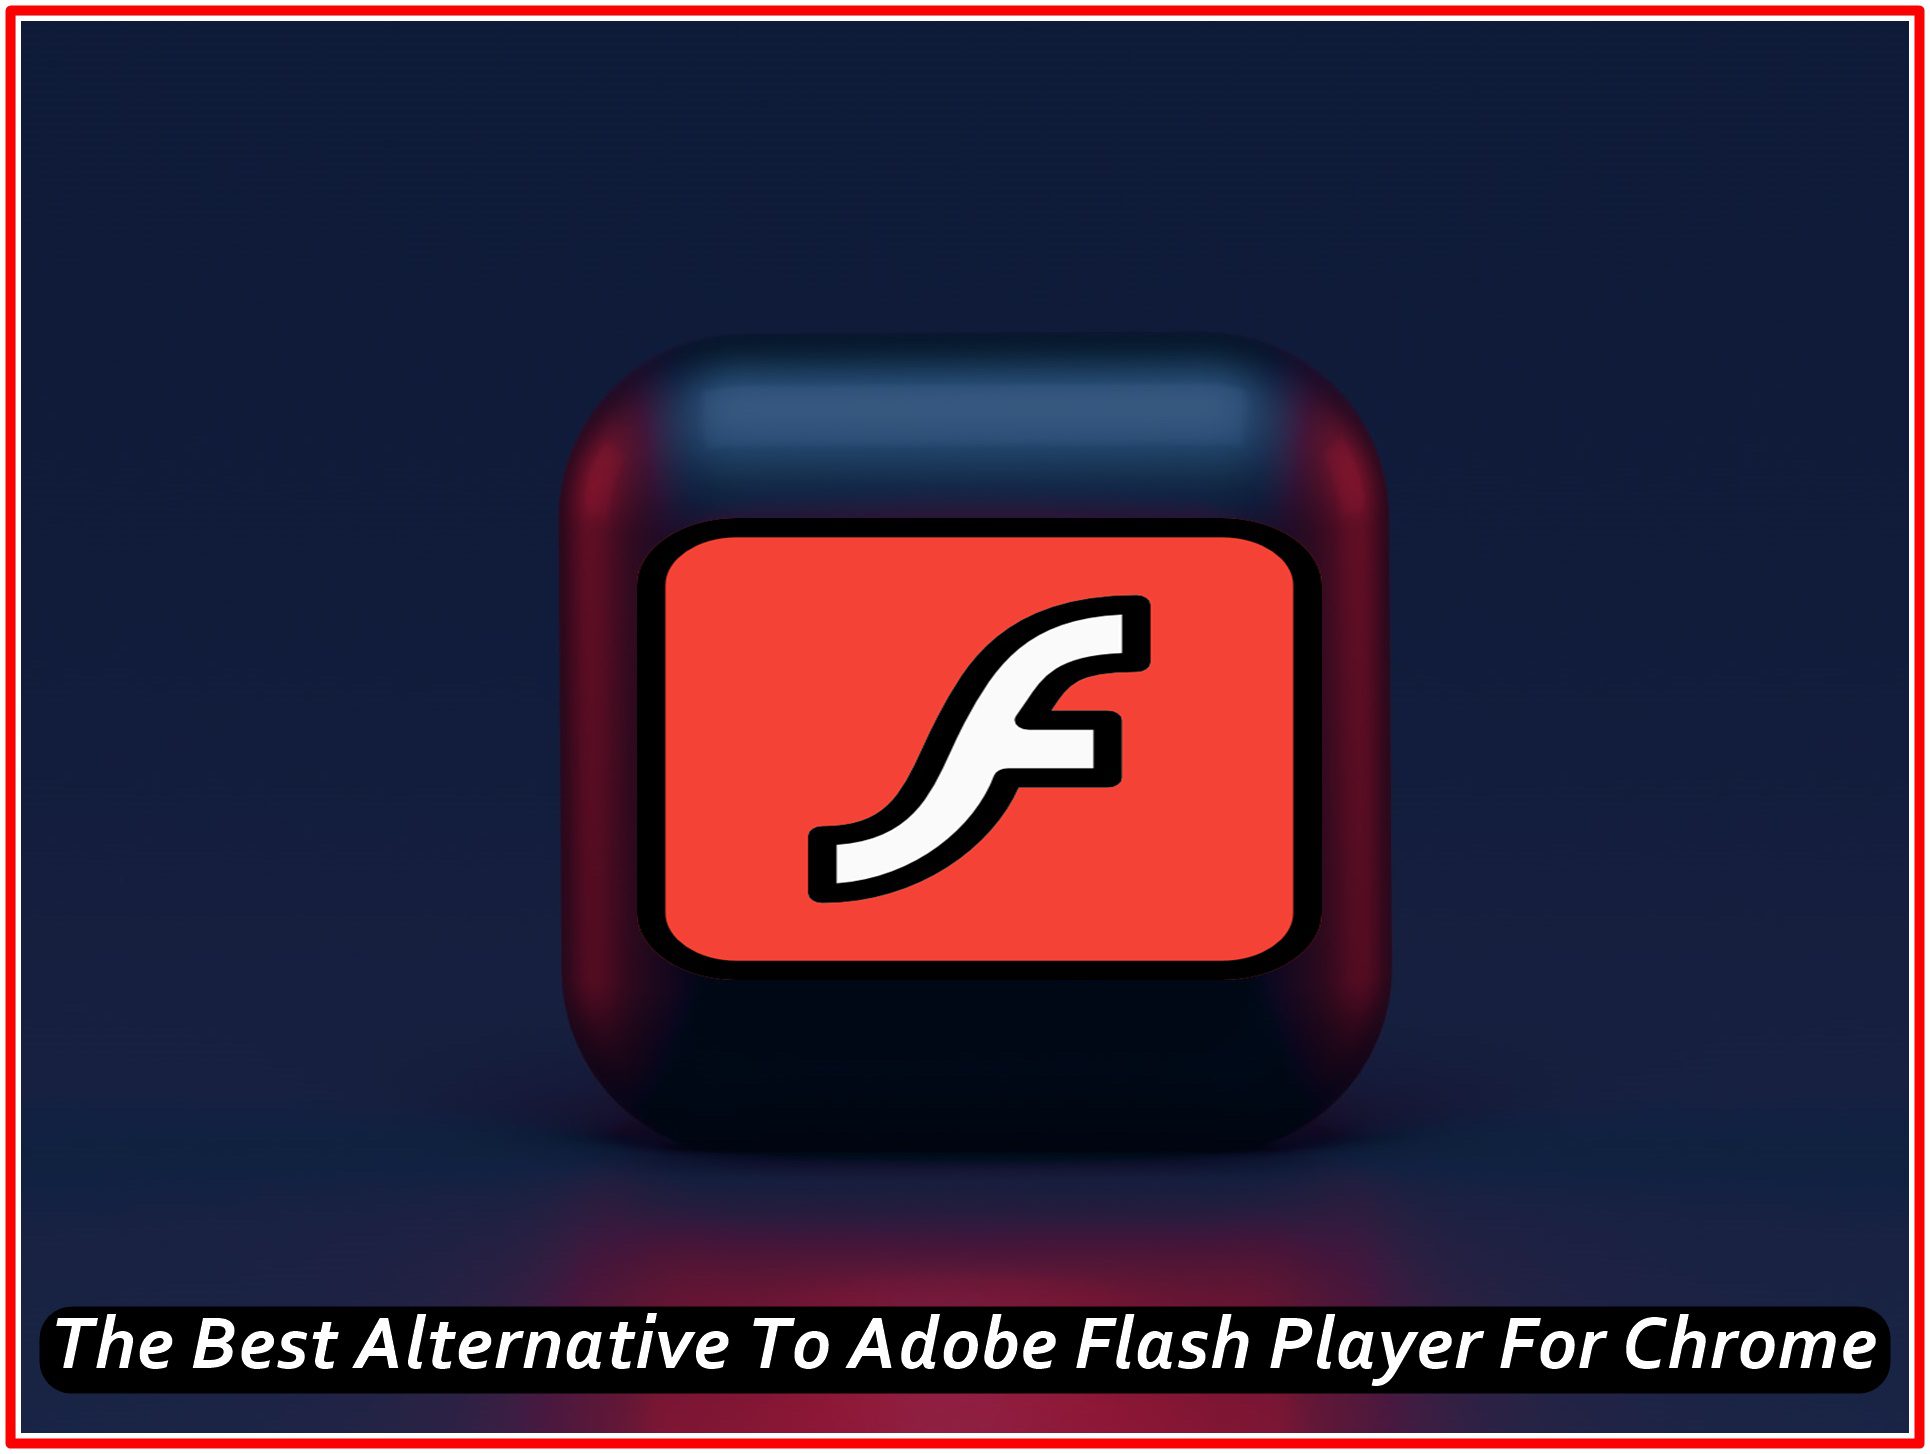 The Best Alternative To Adobe Flash Player For Chrome